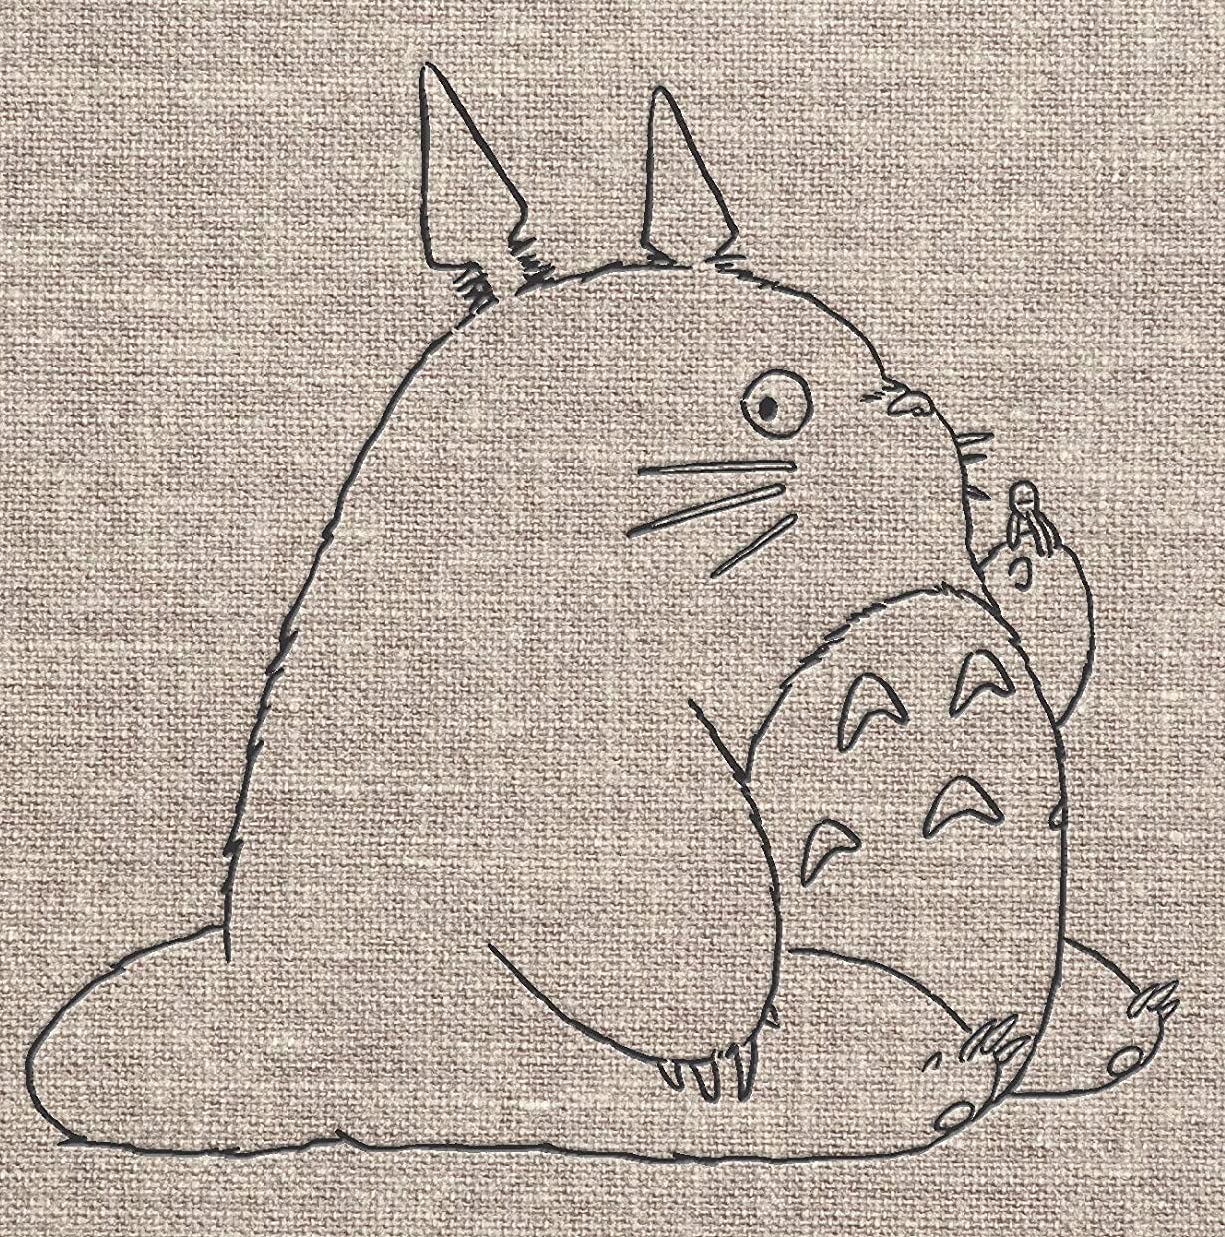 My Neighbor Totoro Sketchbook - Out of the Blue